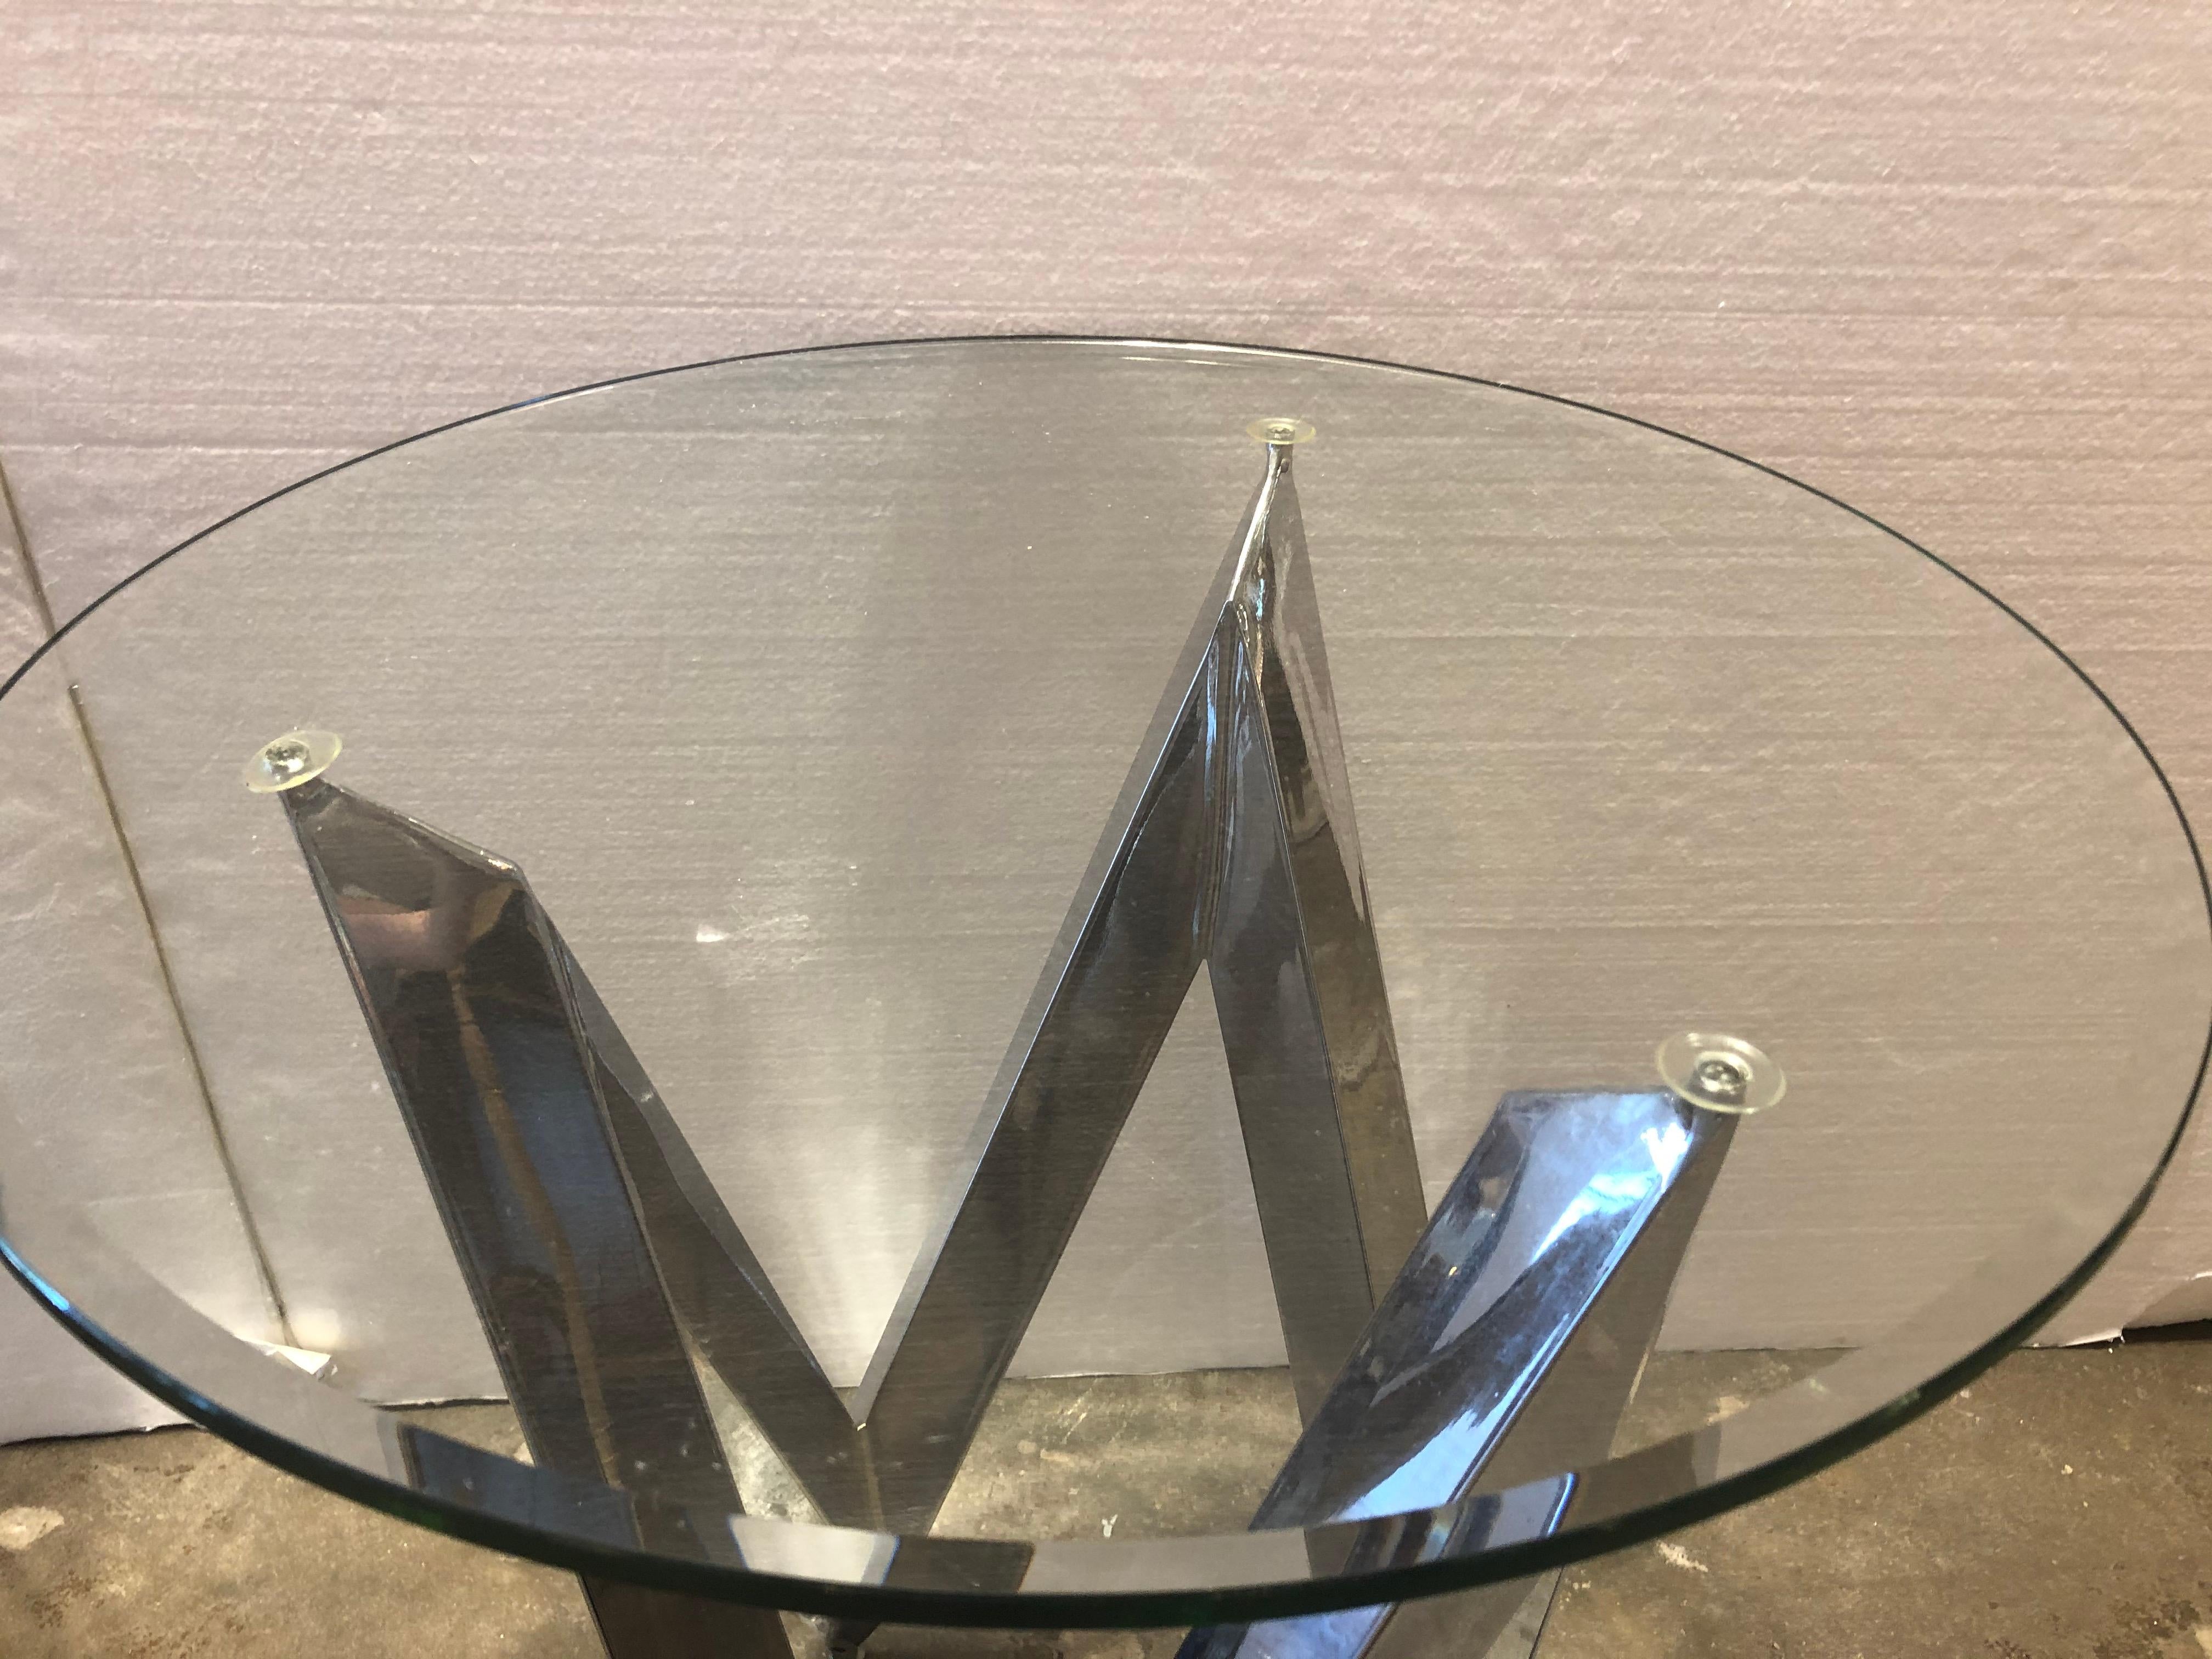 Chrome Chevron design side tables. Angled form. Round glass top.